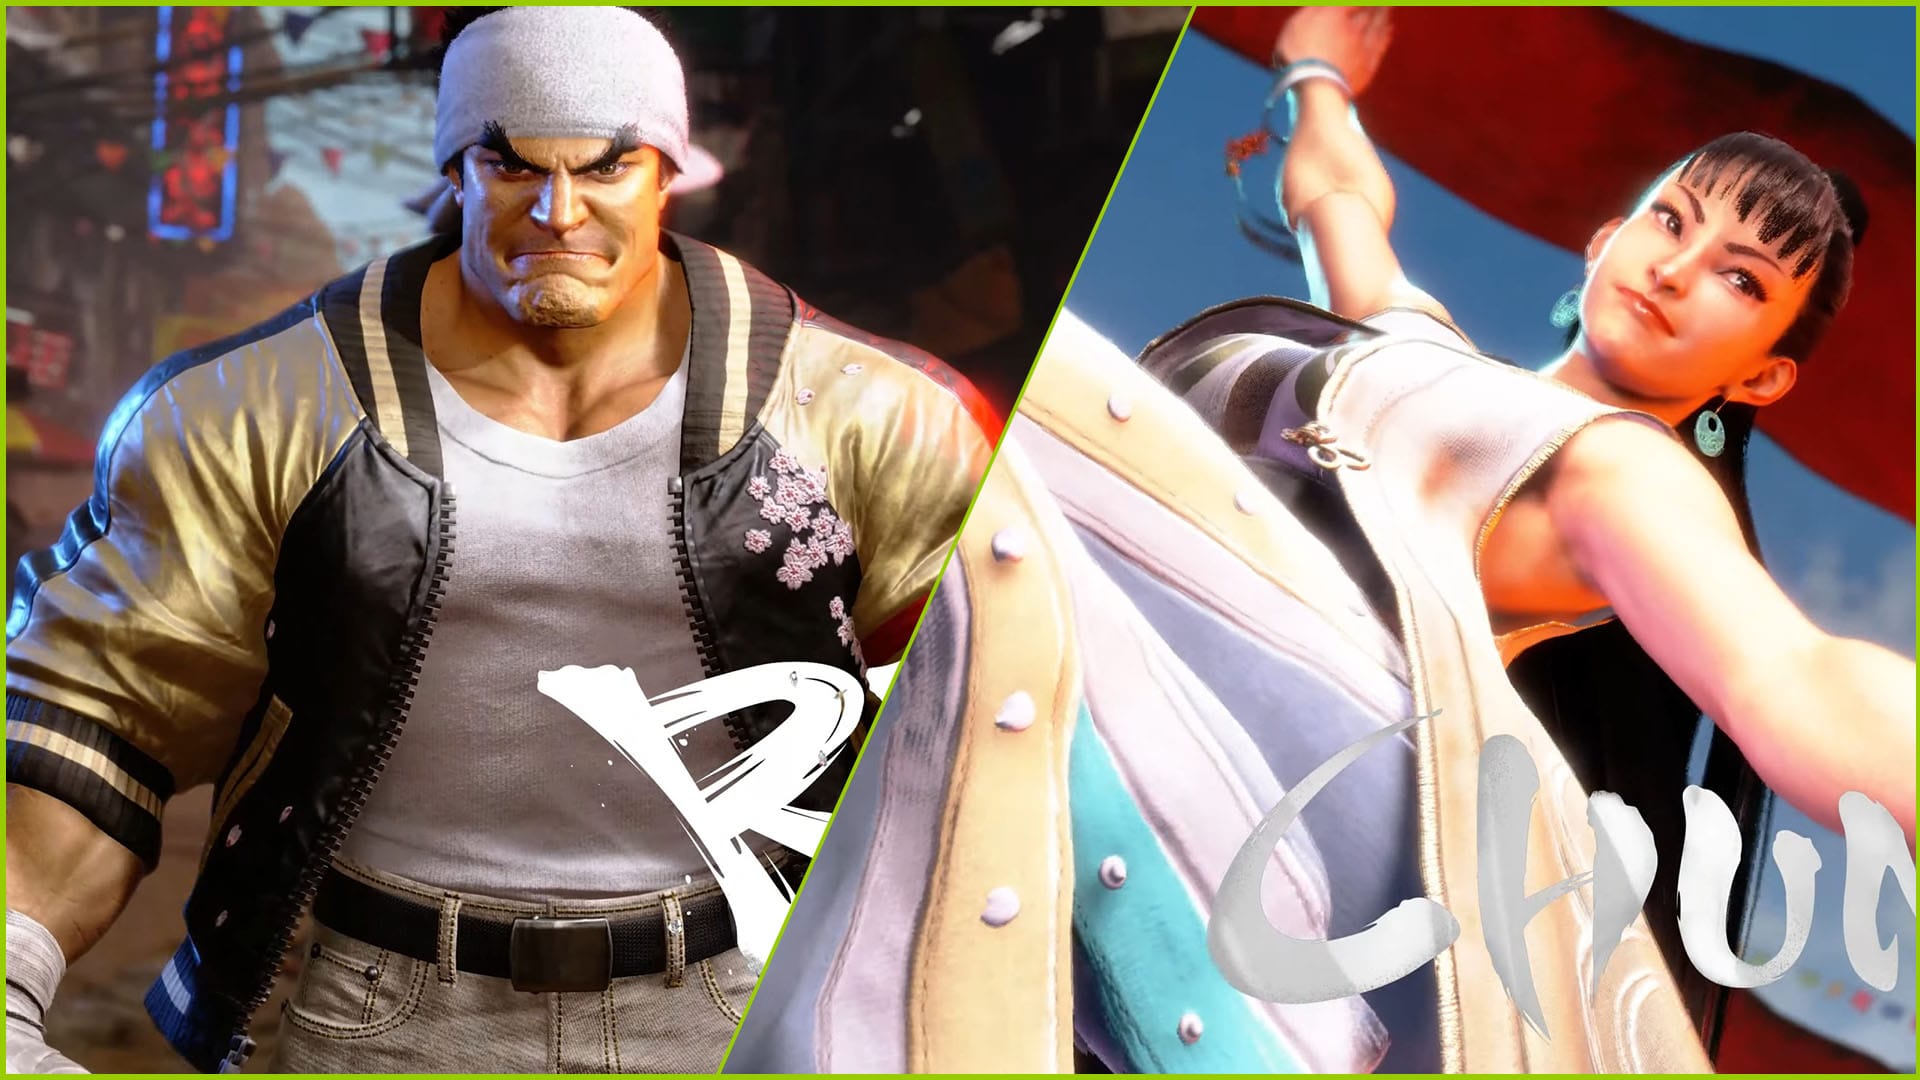 NEW Costume Outfit Ideas For Ryu In Street Fighter 6 